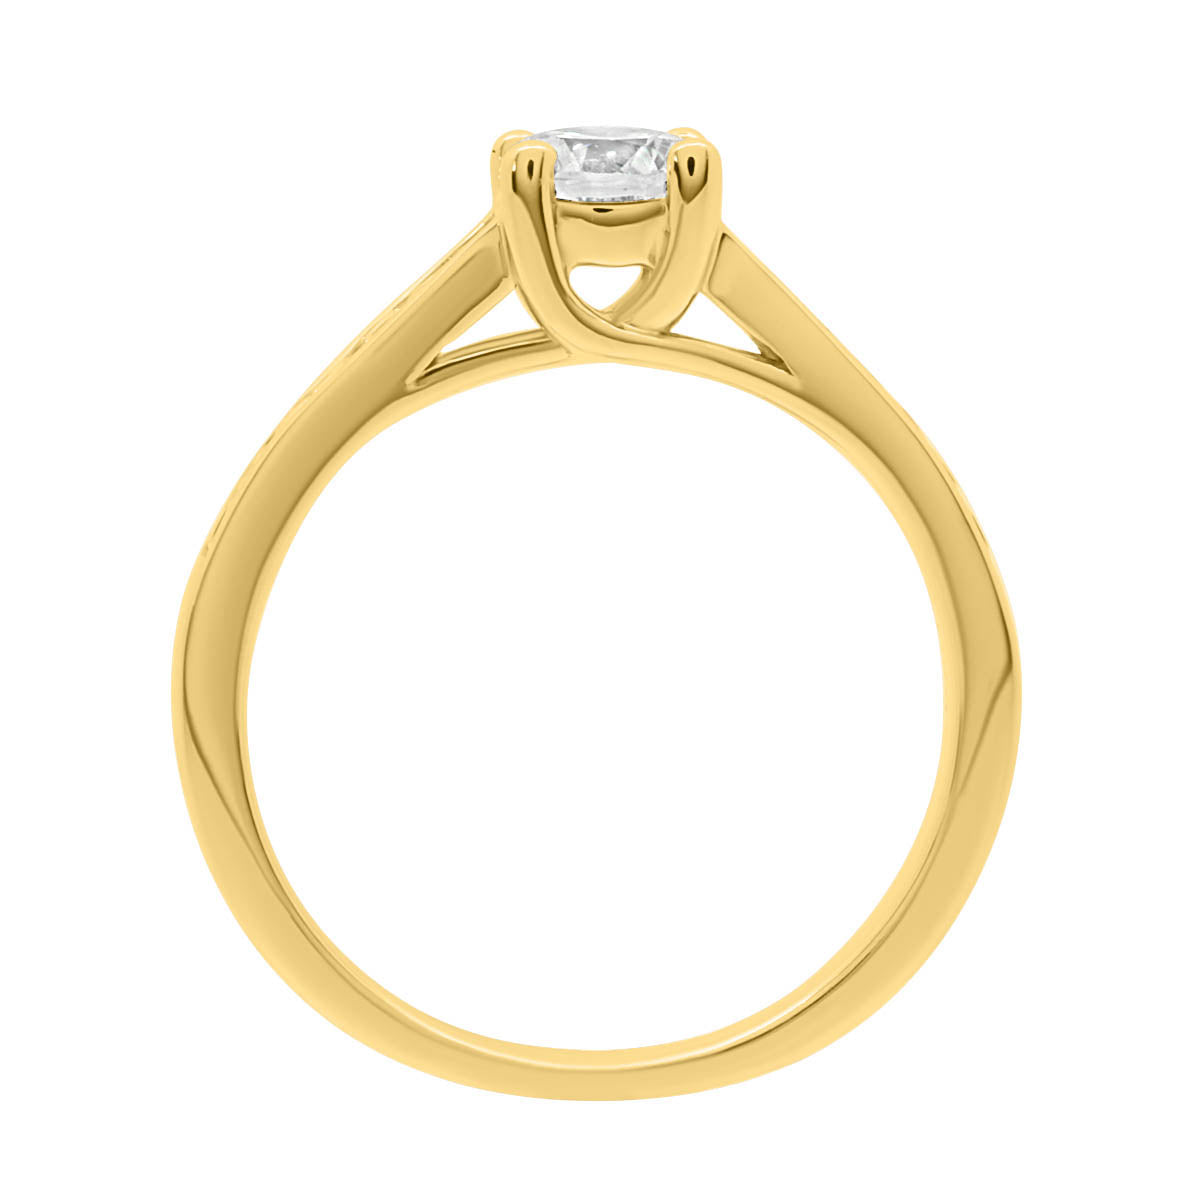 Round Diamond with Channel Set Princess Cut Diamonds in yellow gold standing upright